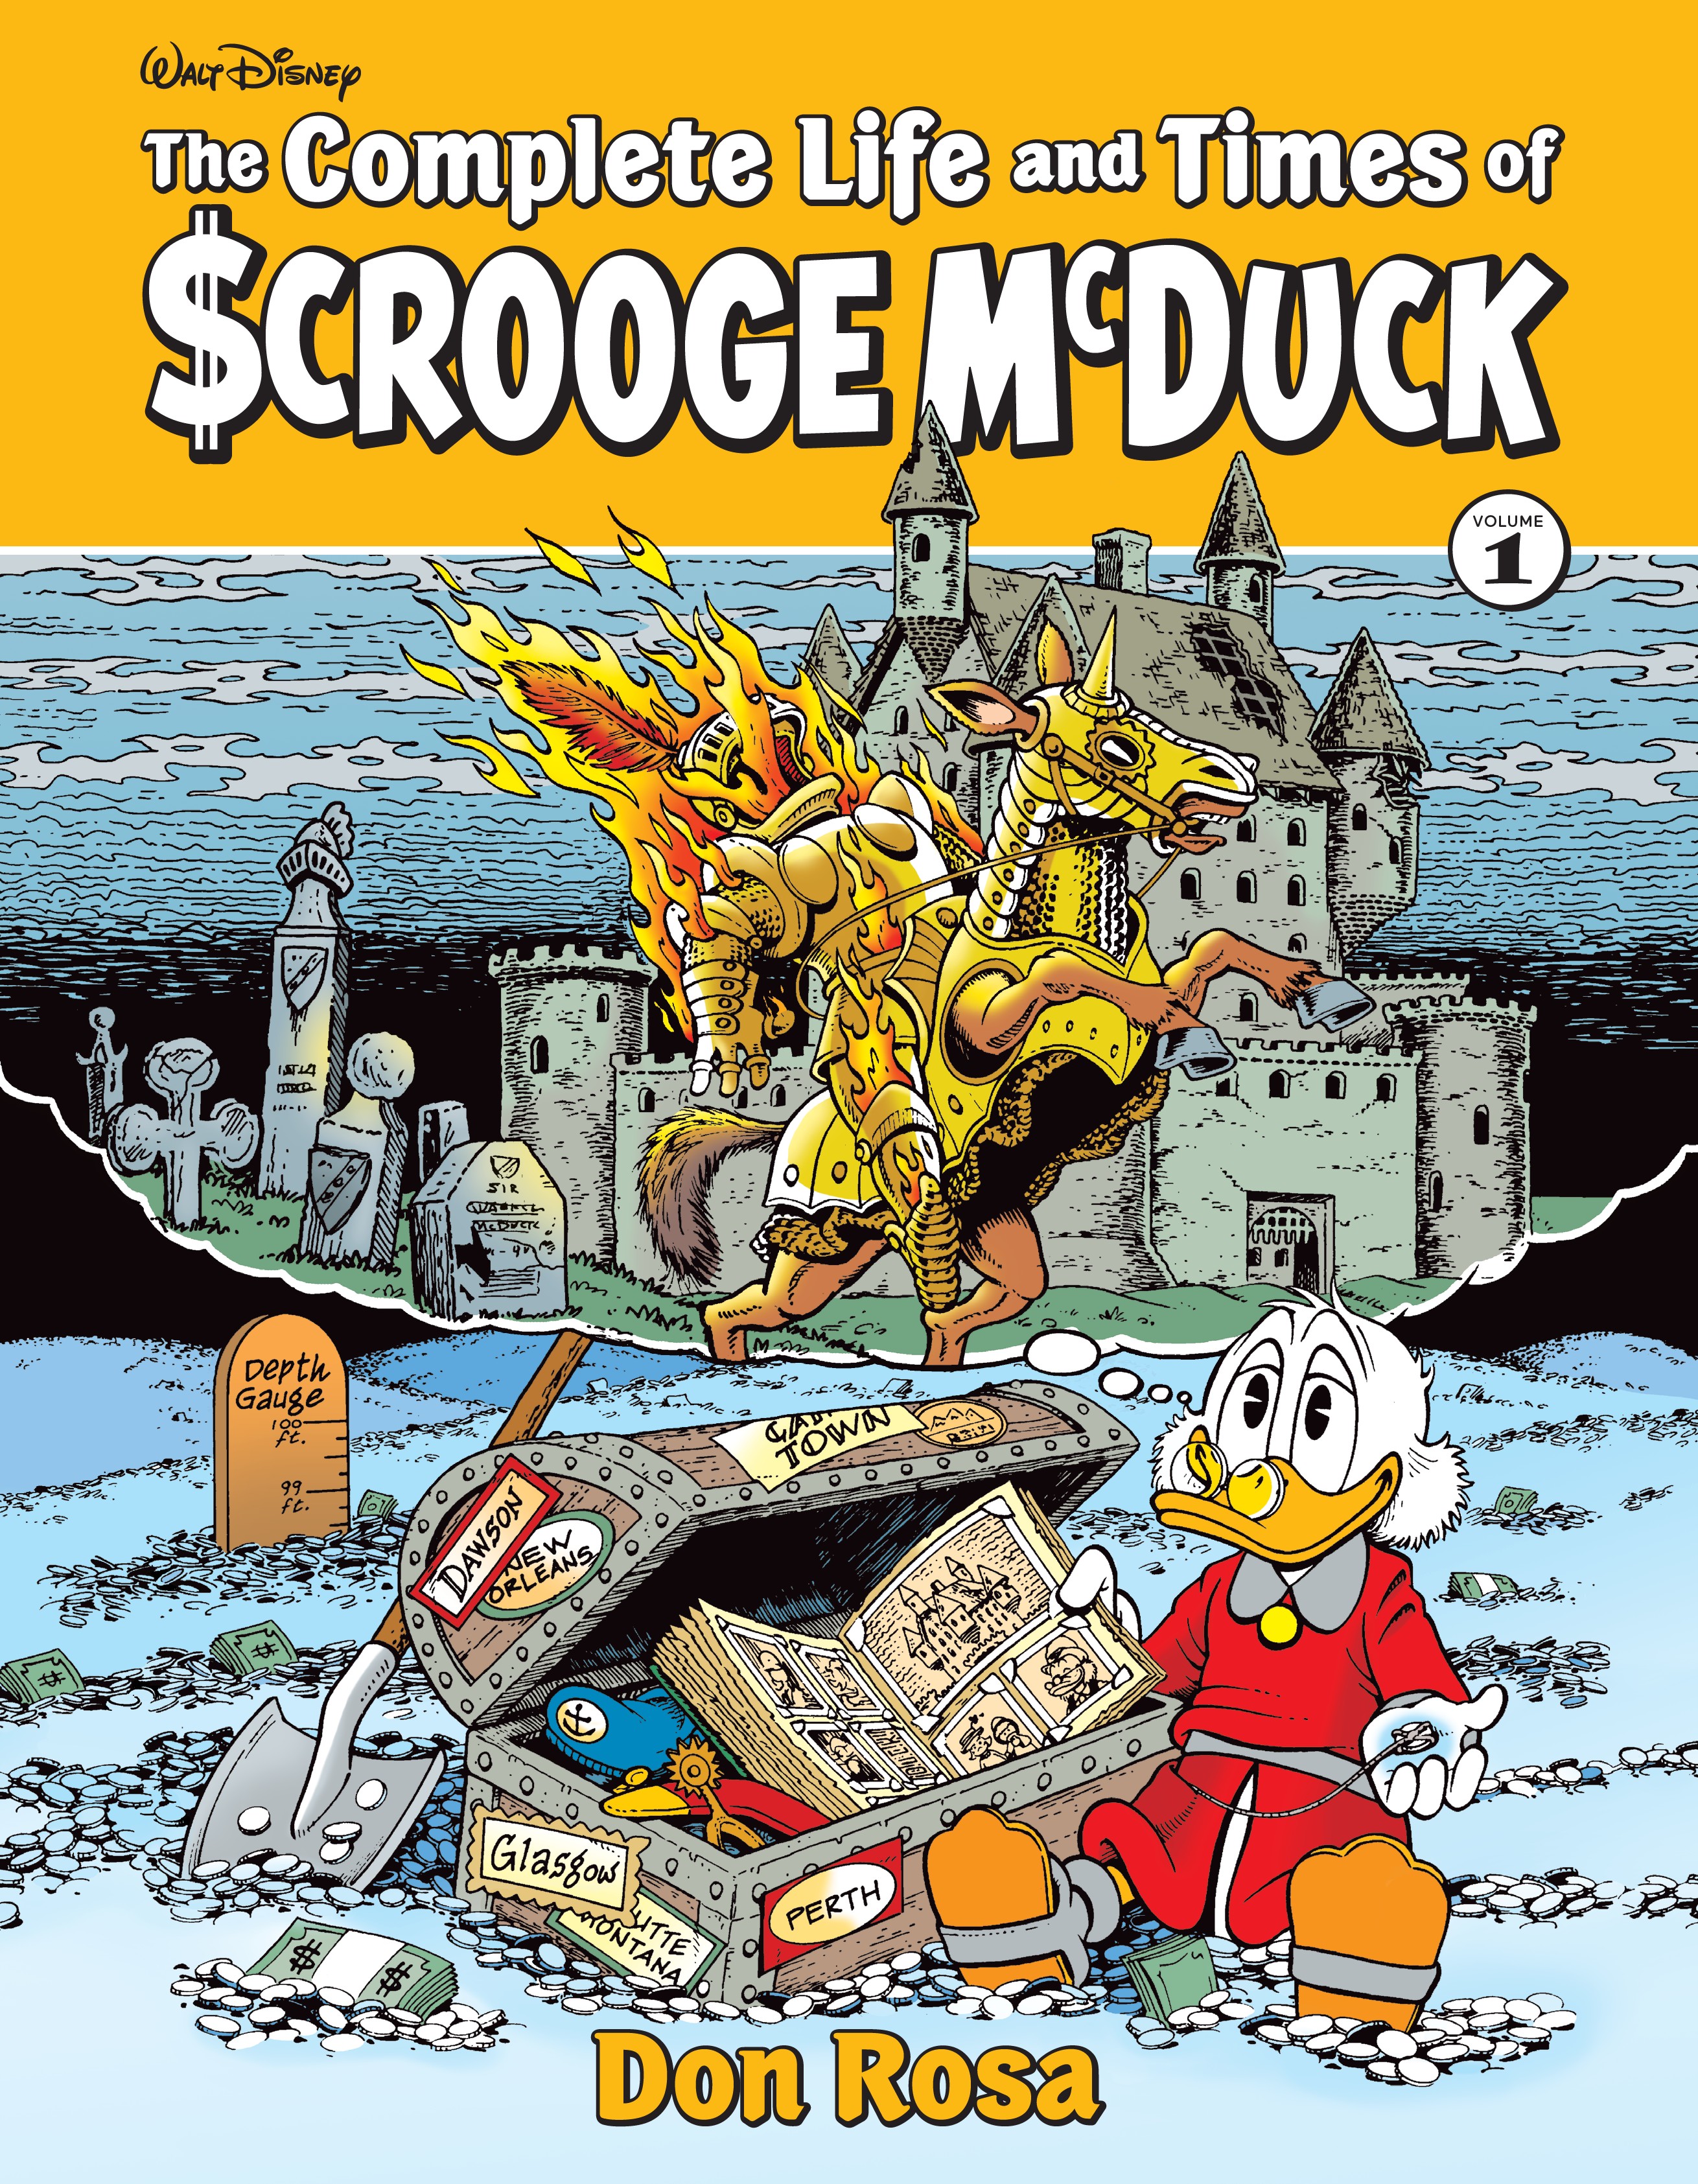 Read online The Complete Life and Times of Scrooge McDuck comic -  Issue # TPB 1 (Part 1) - 1